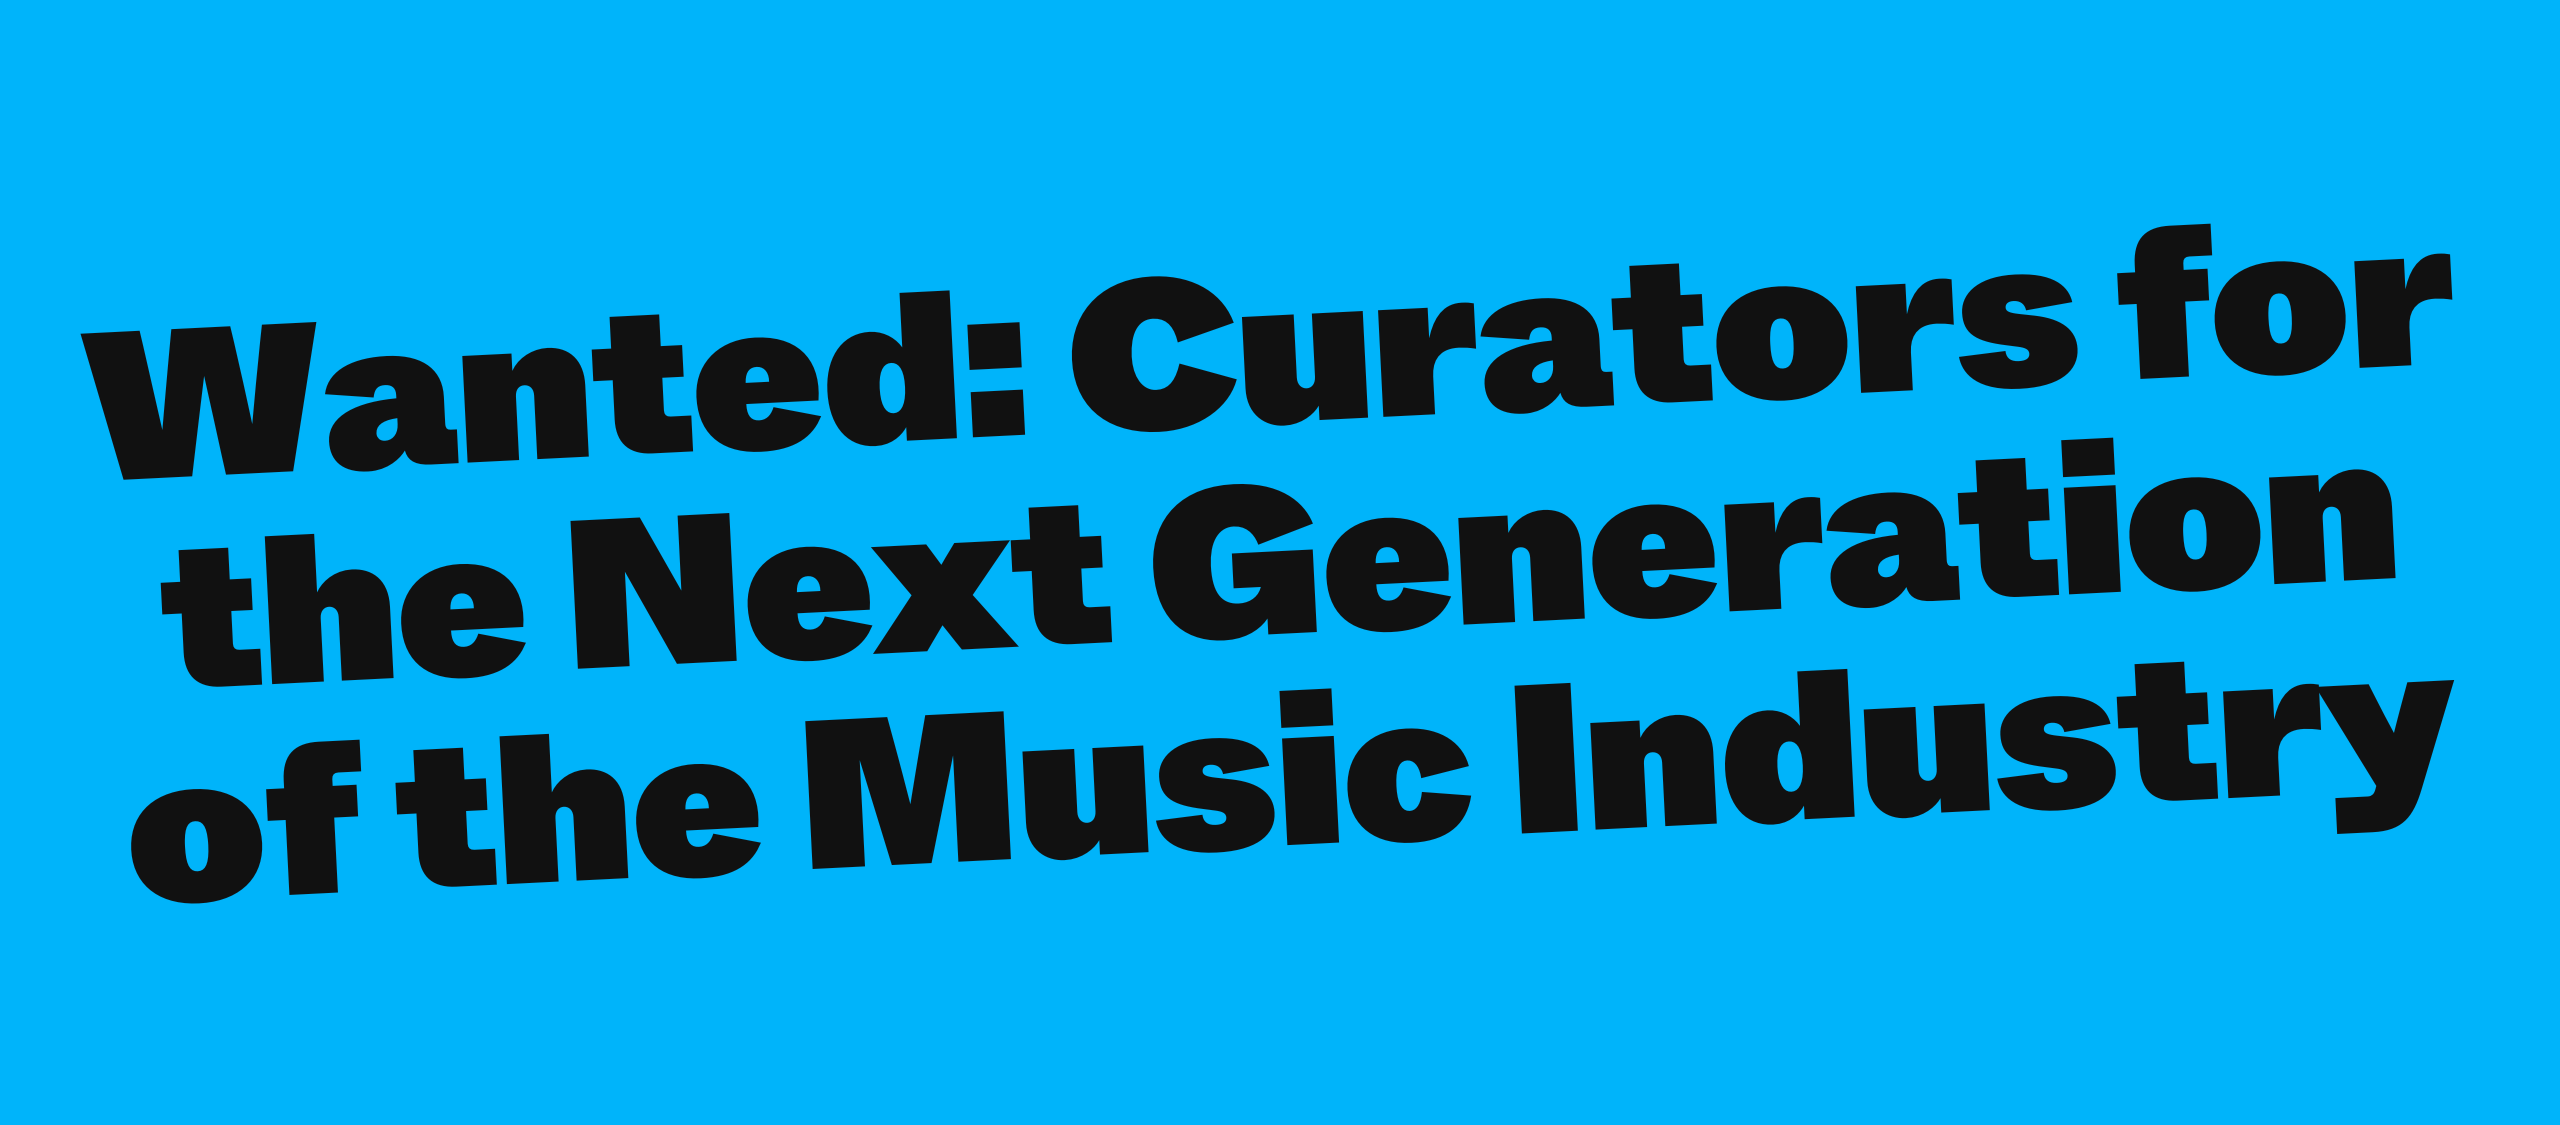 Wanted: Curators for the Next Generation of the Music Industry